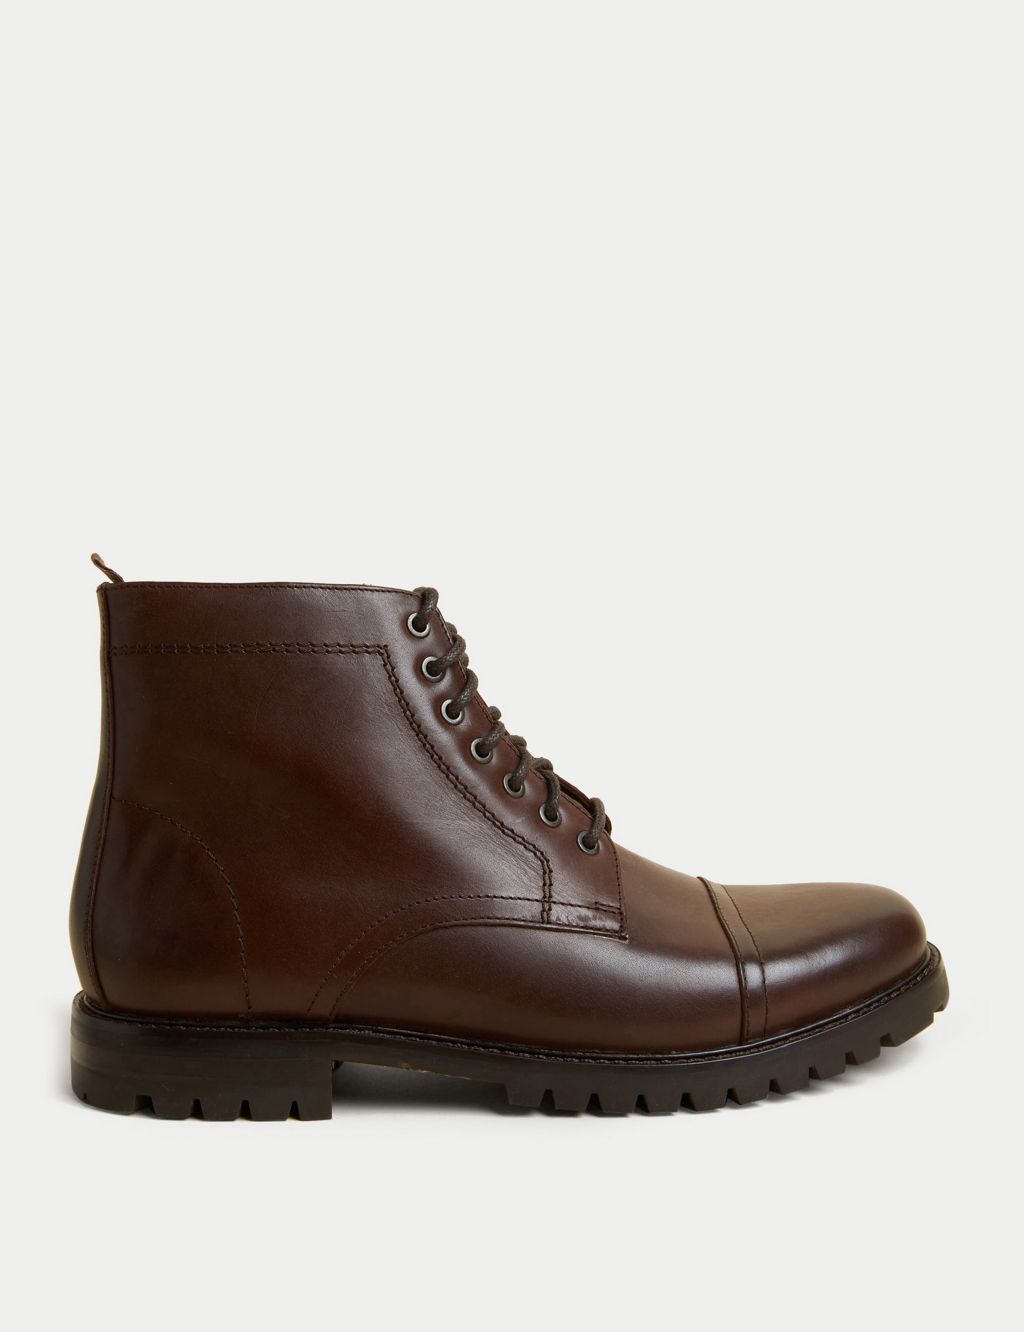 Barrington Leather Casual Boots image 1